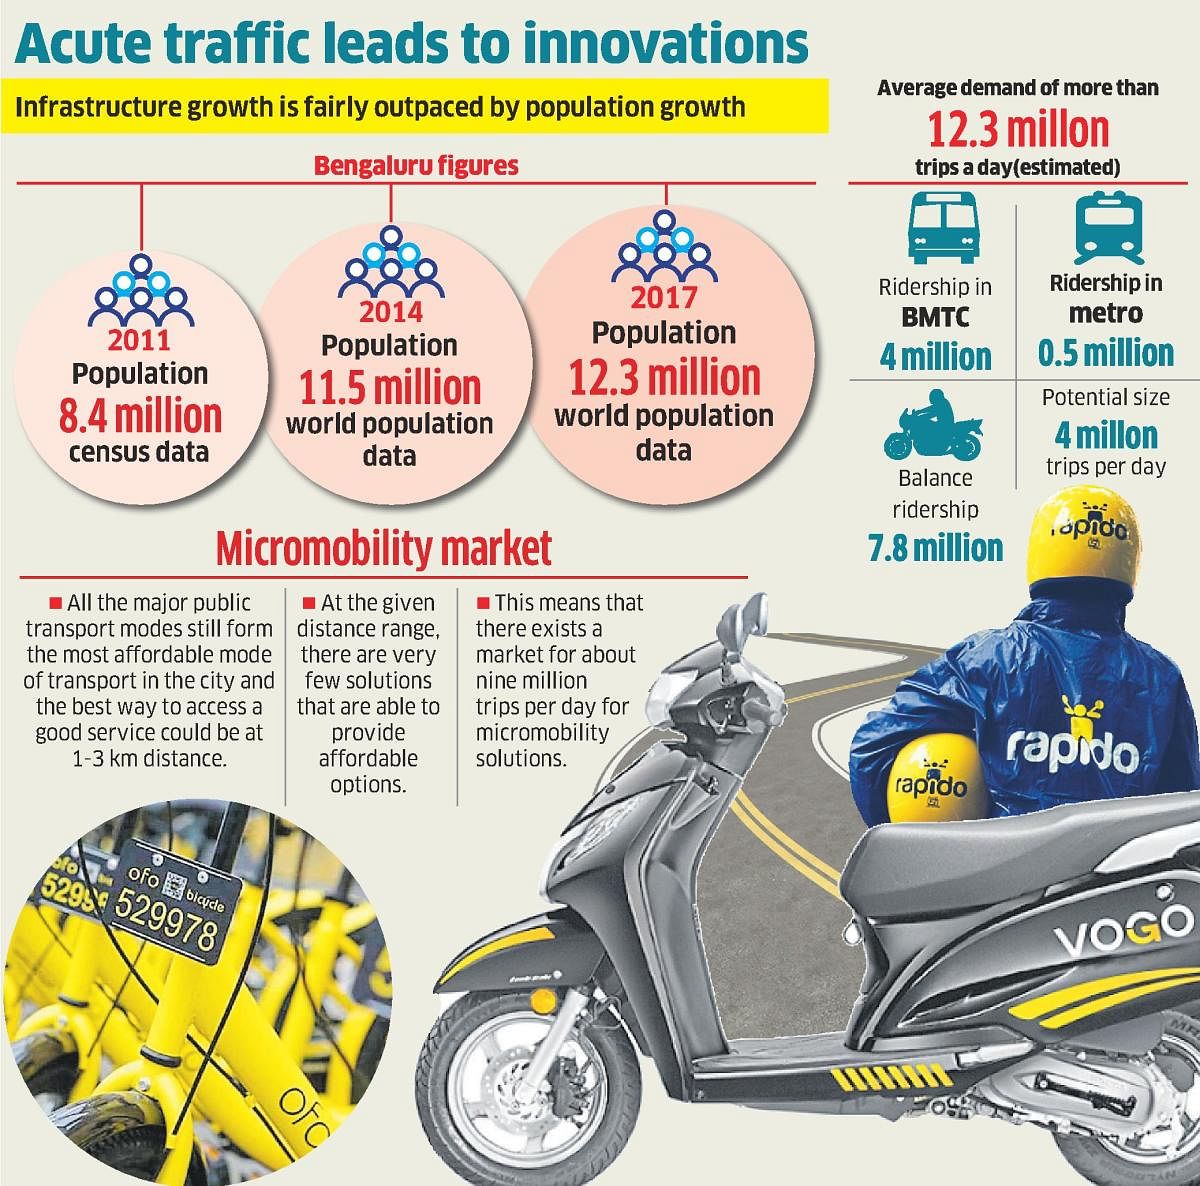 Micro-mobility is essentially defined as small transportation modes propelled by humans or electric motors with speed in the range below 50 km/hour.